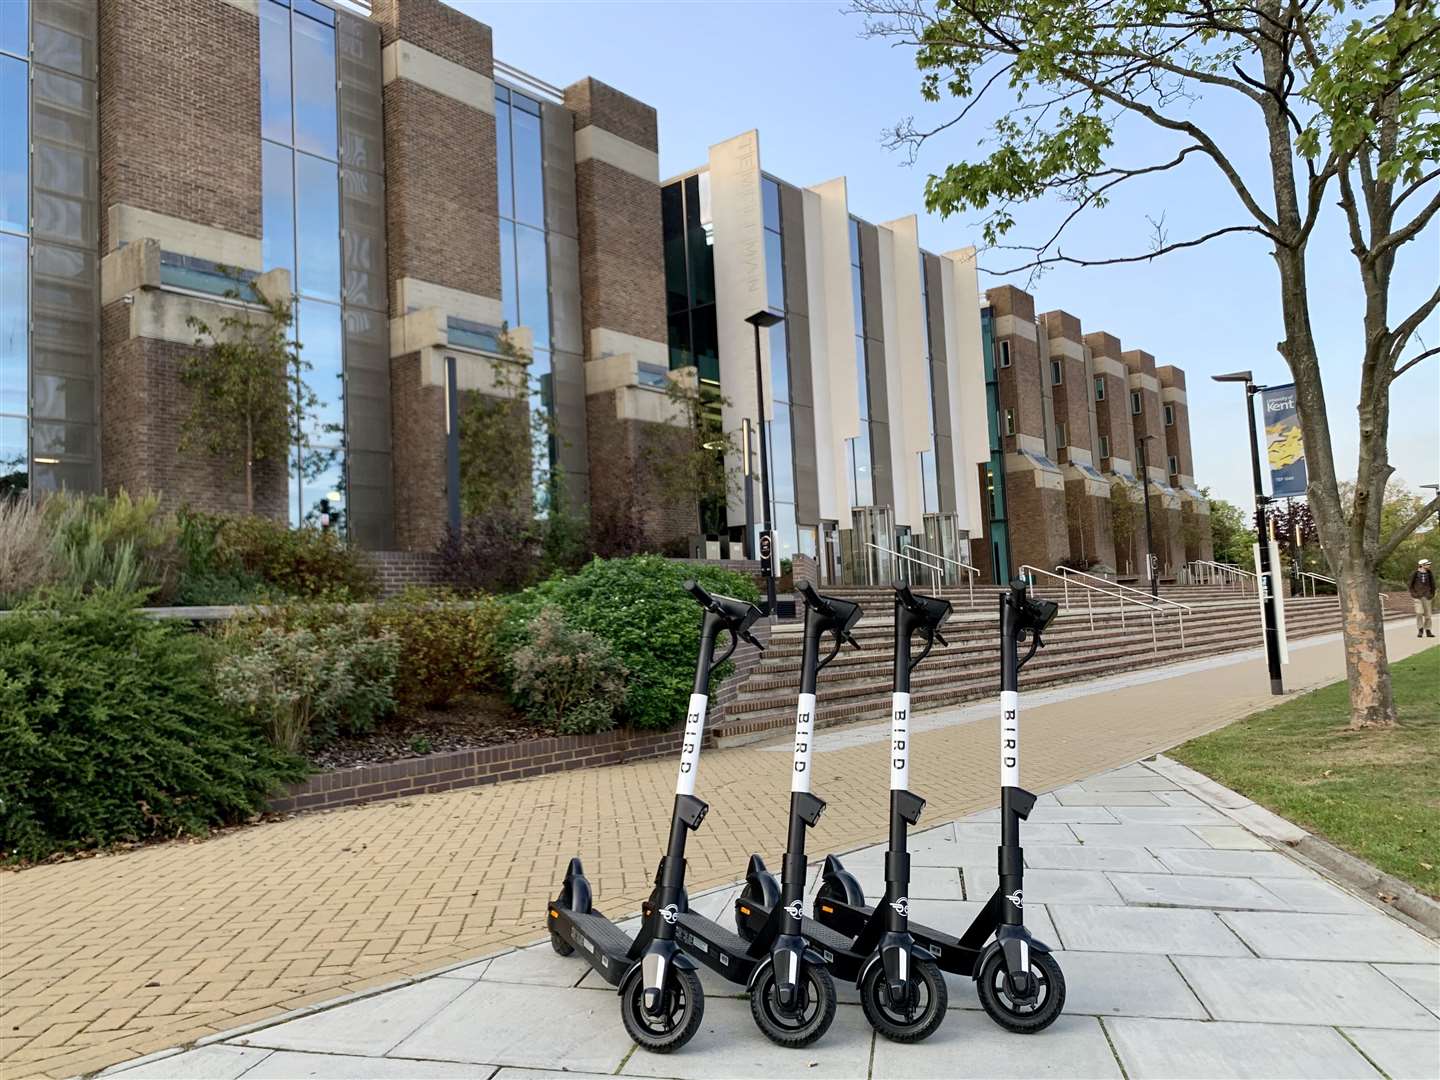 Cities like Canterbury are part of e-scooter trials where they can be ridden legally